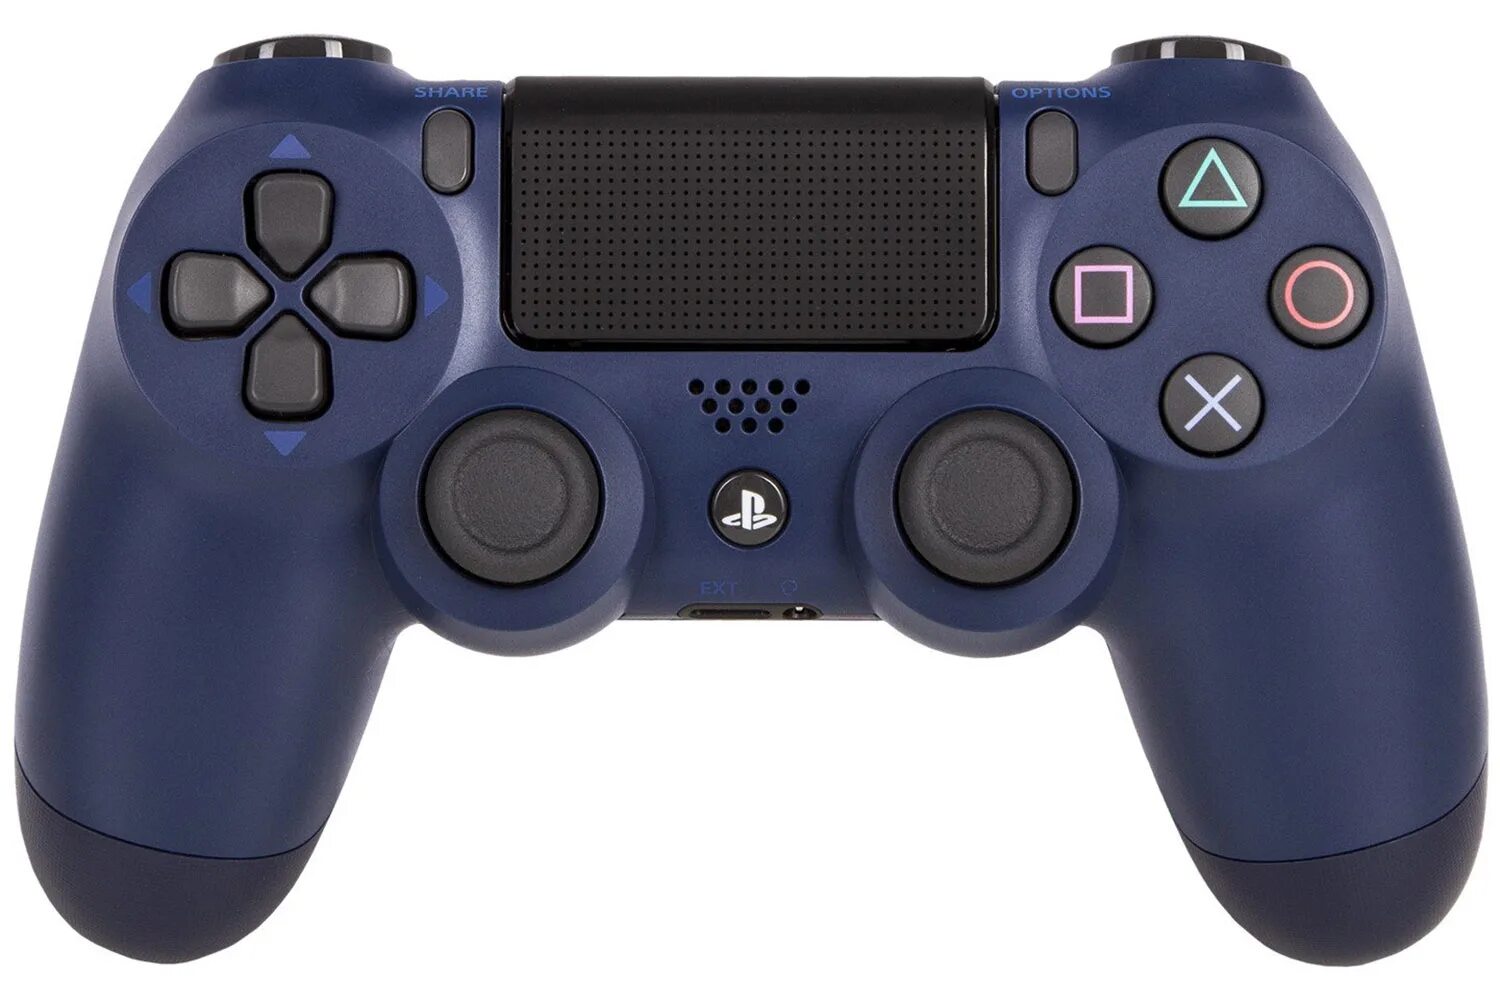 Sony PLAYSTATION 4 Dualshock 4. Sony Dualshock 4 Sony. Джойстик Dualshock 4. CUH-zct2e. Ps4 джойстик android